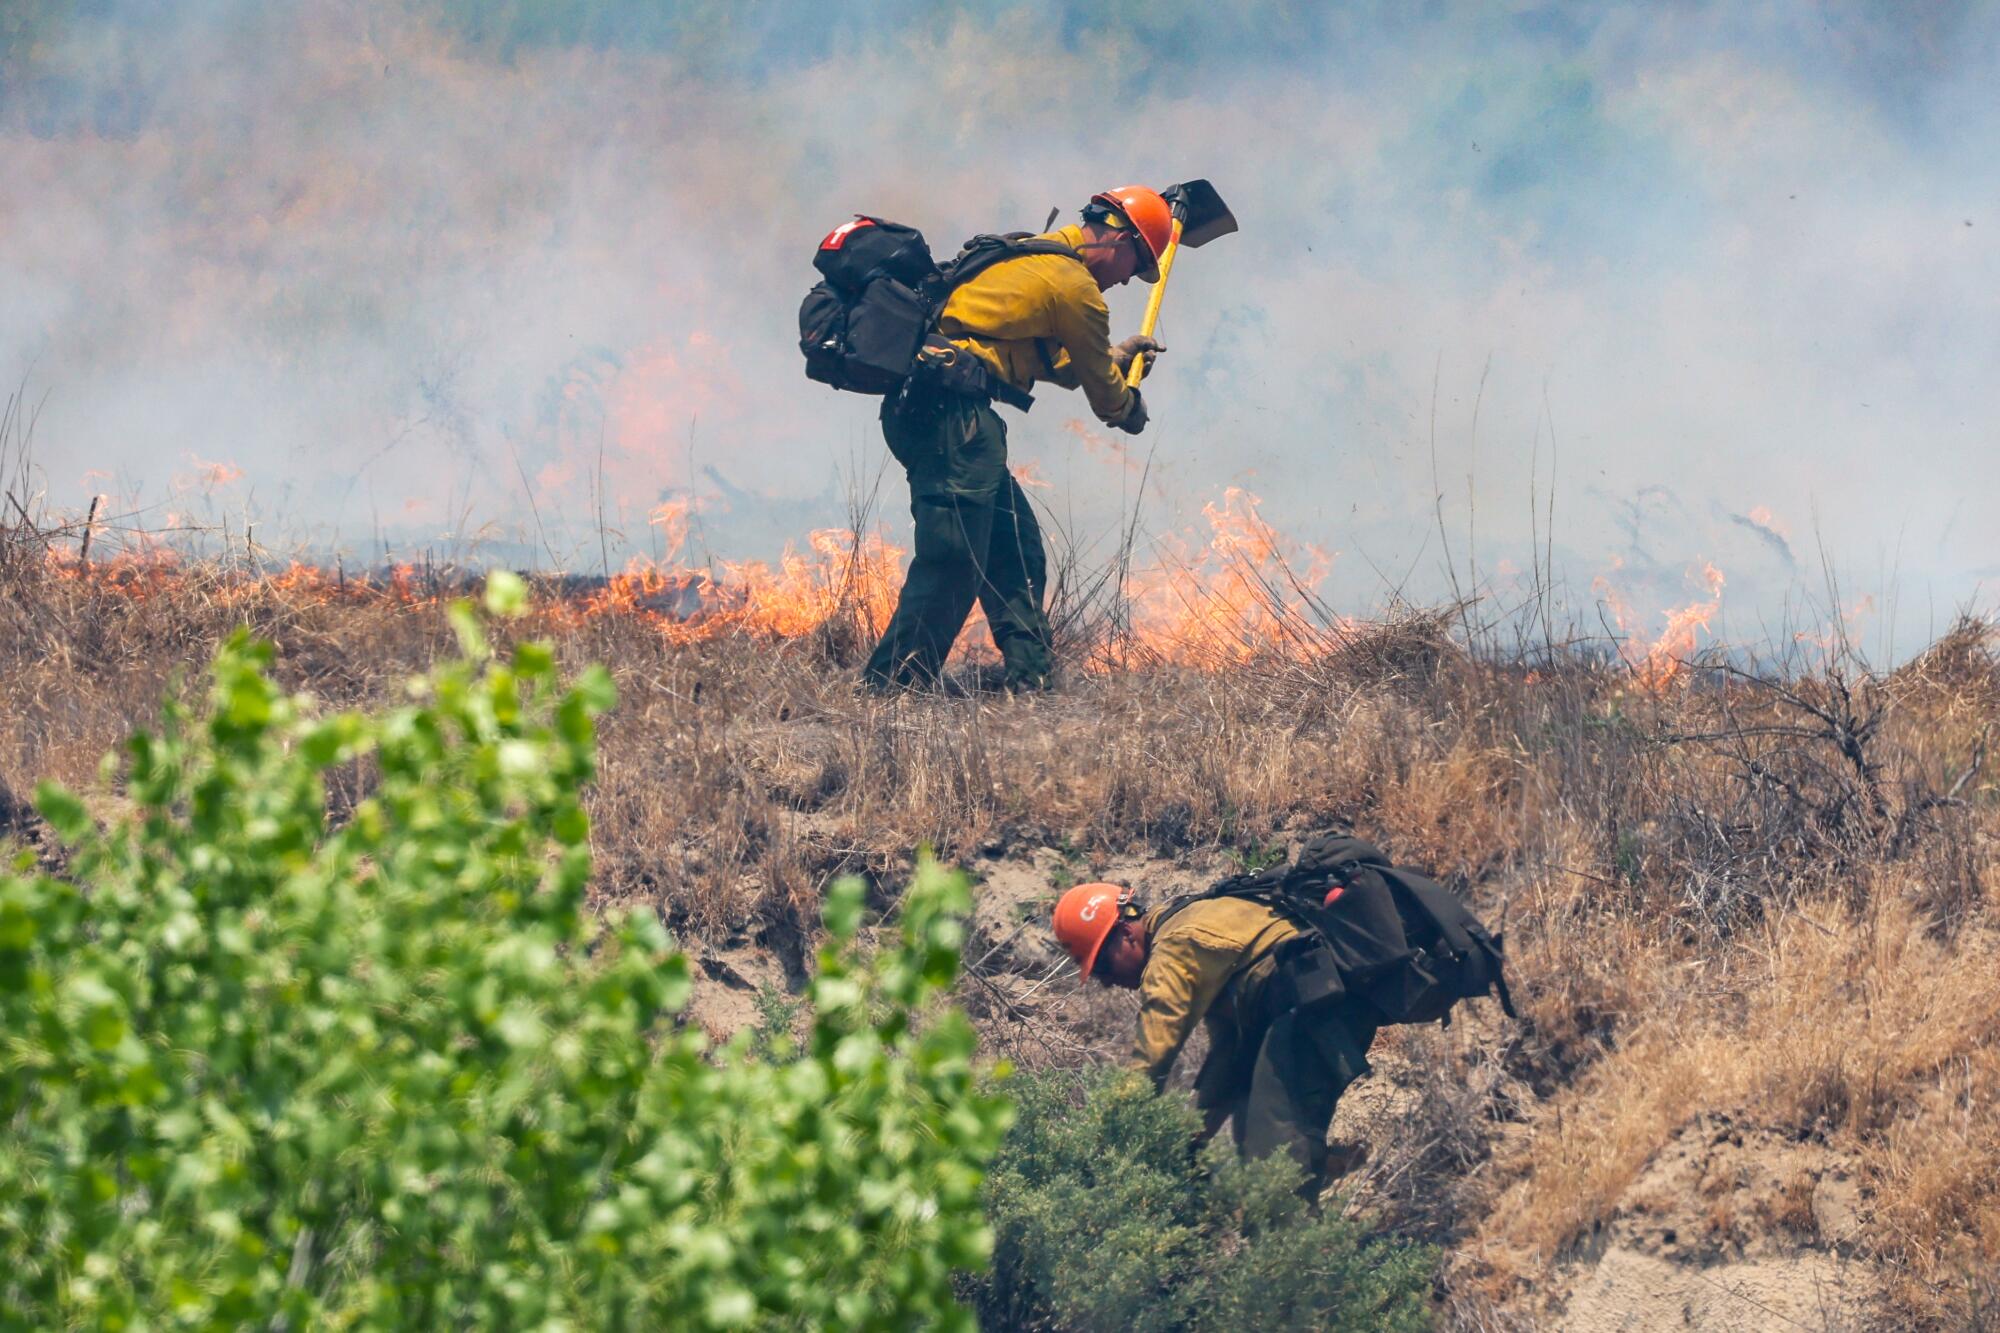 Crew members of the Little Tujunga Hot Shots work to control the flames.